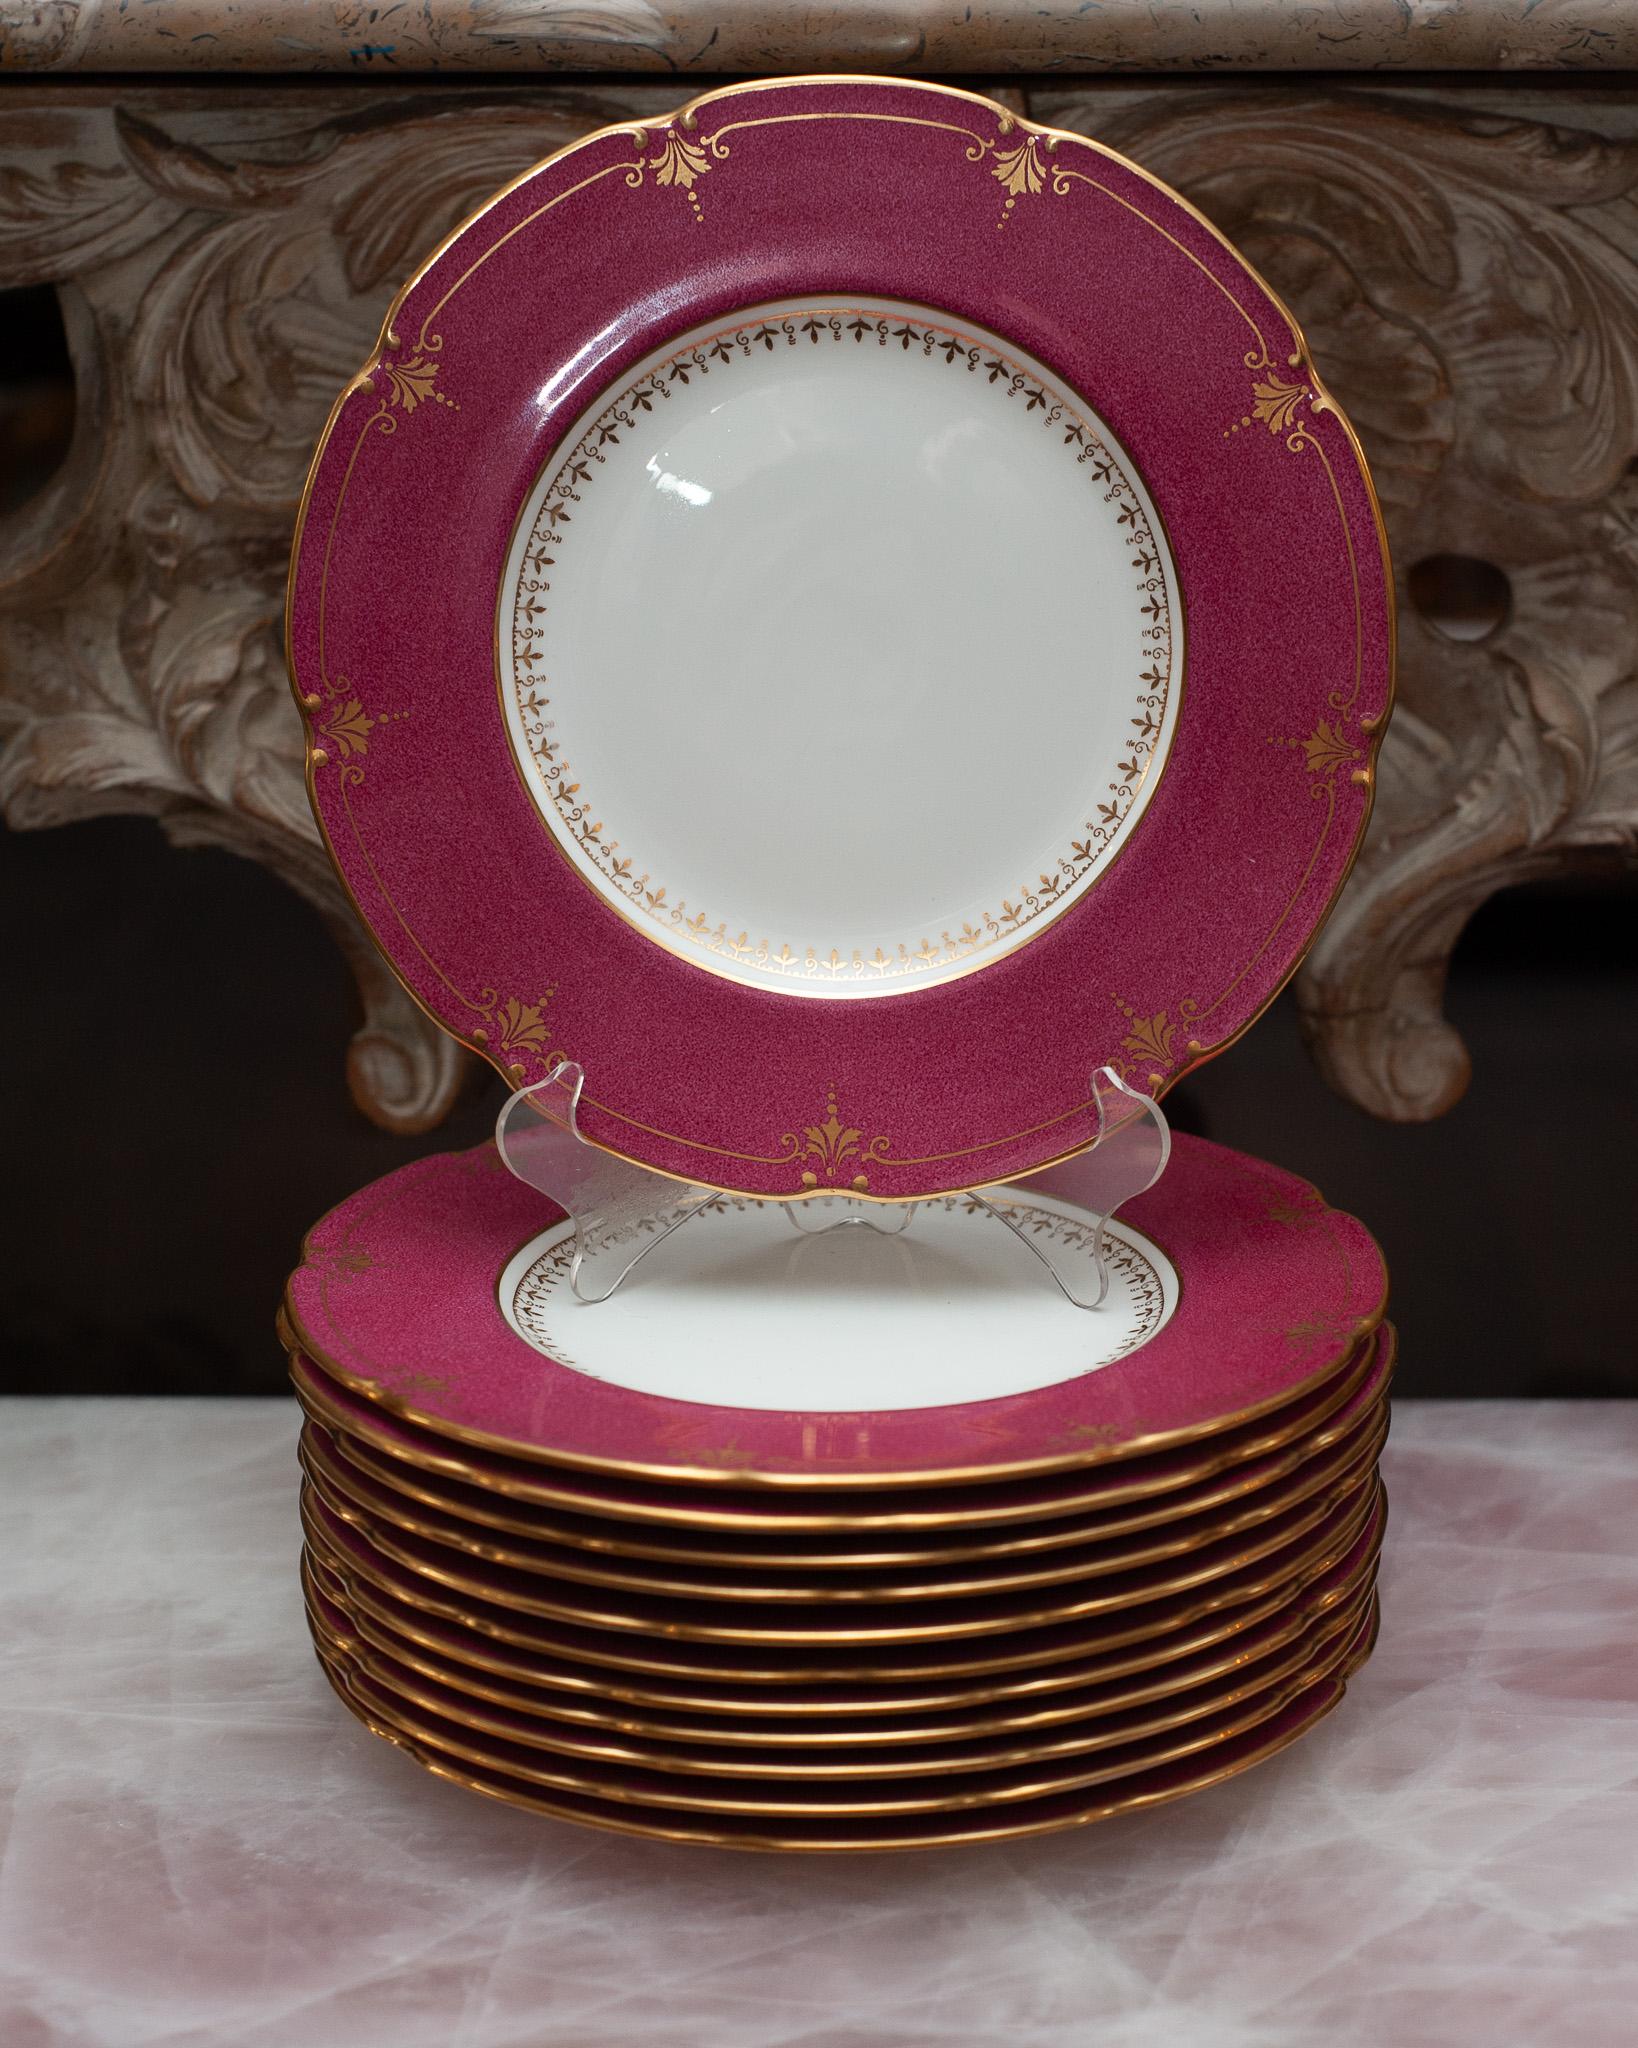 A set of 12 antique English Wedgwood cranberry side plates, made for Bailey, Banks & Biddle Co, Philadelphia, circa early 19th century. Ornate and delicately gilt, the cranberry colour is sure to delight and uplift any tablescape. 